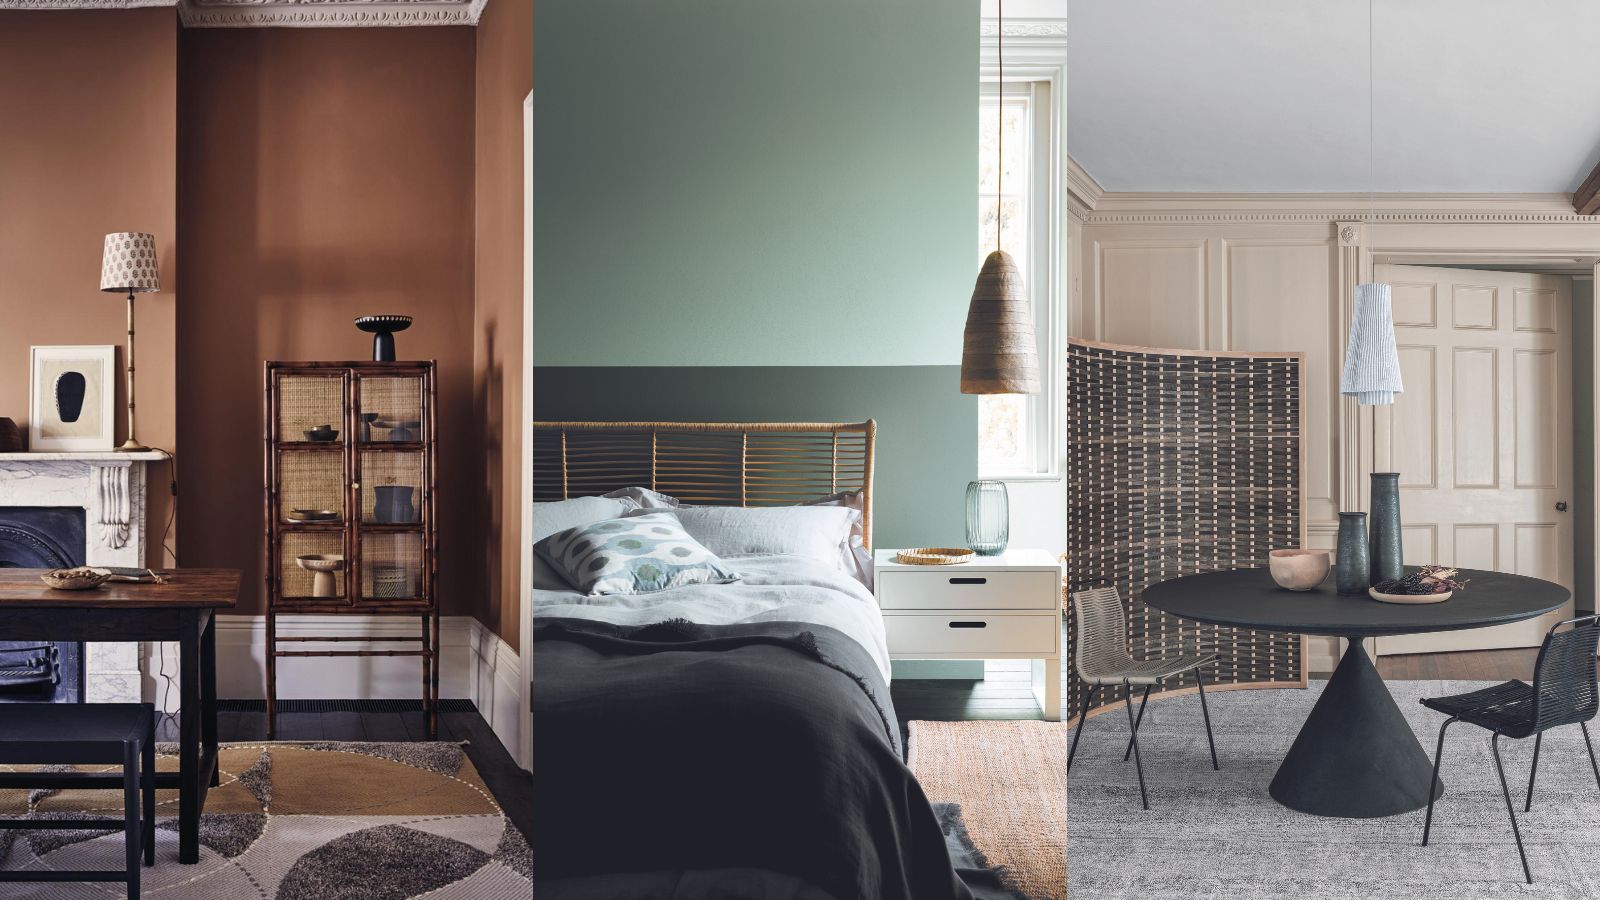 What are the most relaxing colors? Experts prefer these hues